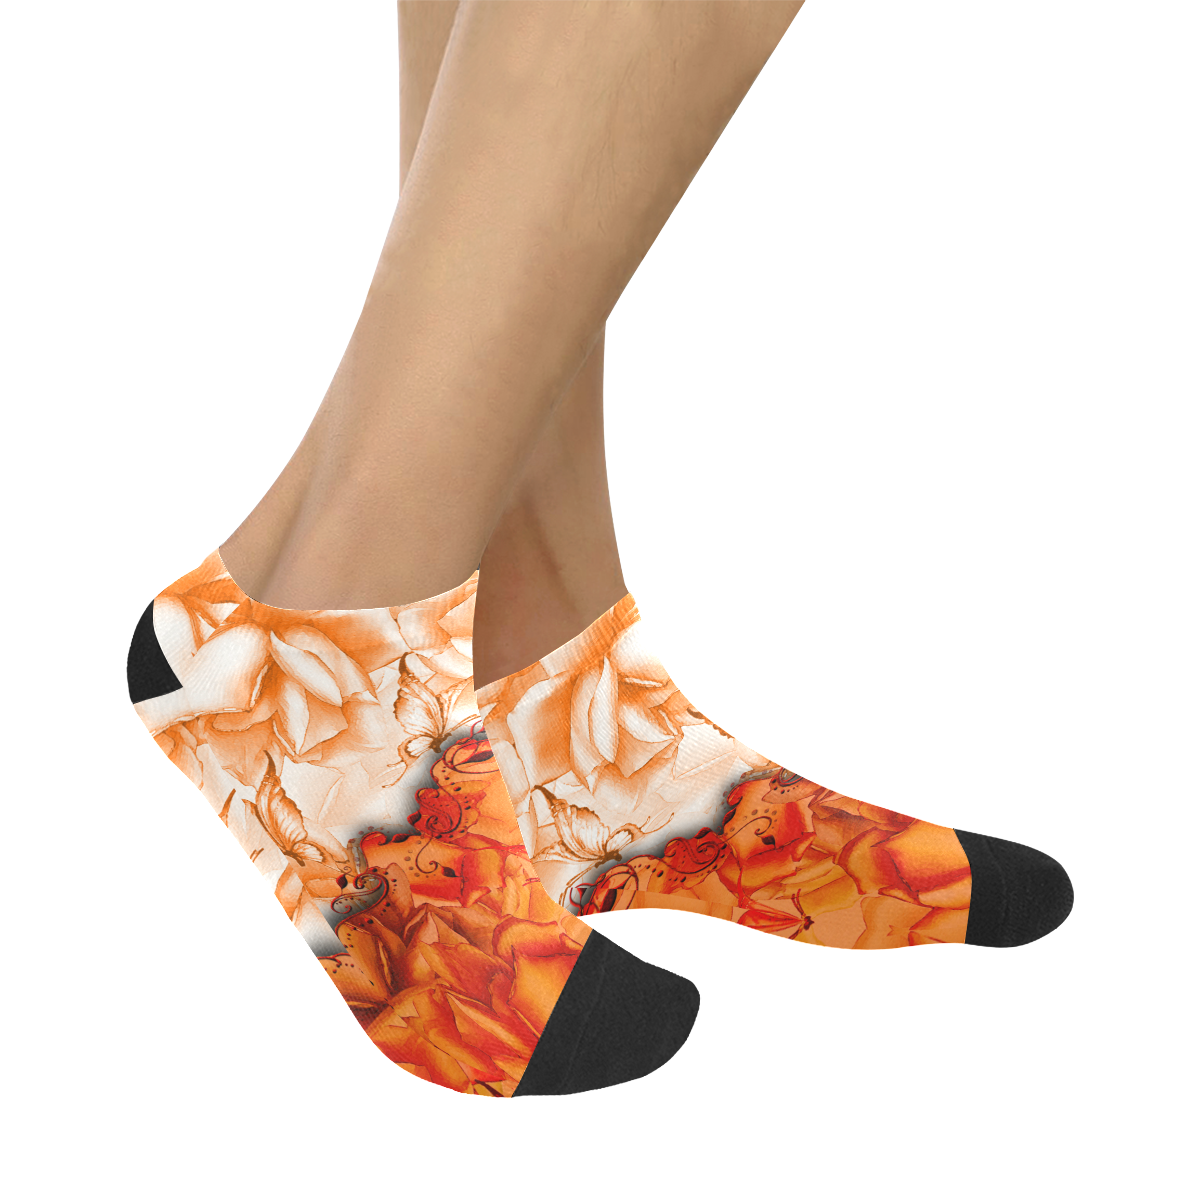 Sorf red flowers with butterflies Men's Ankle Socks